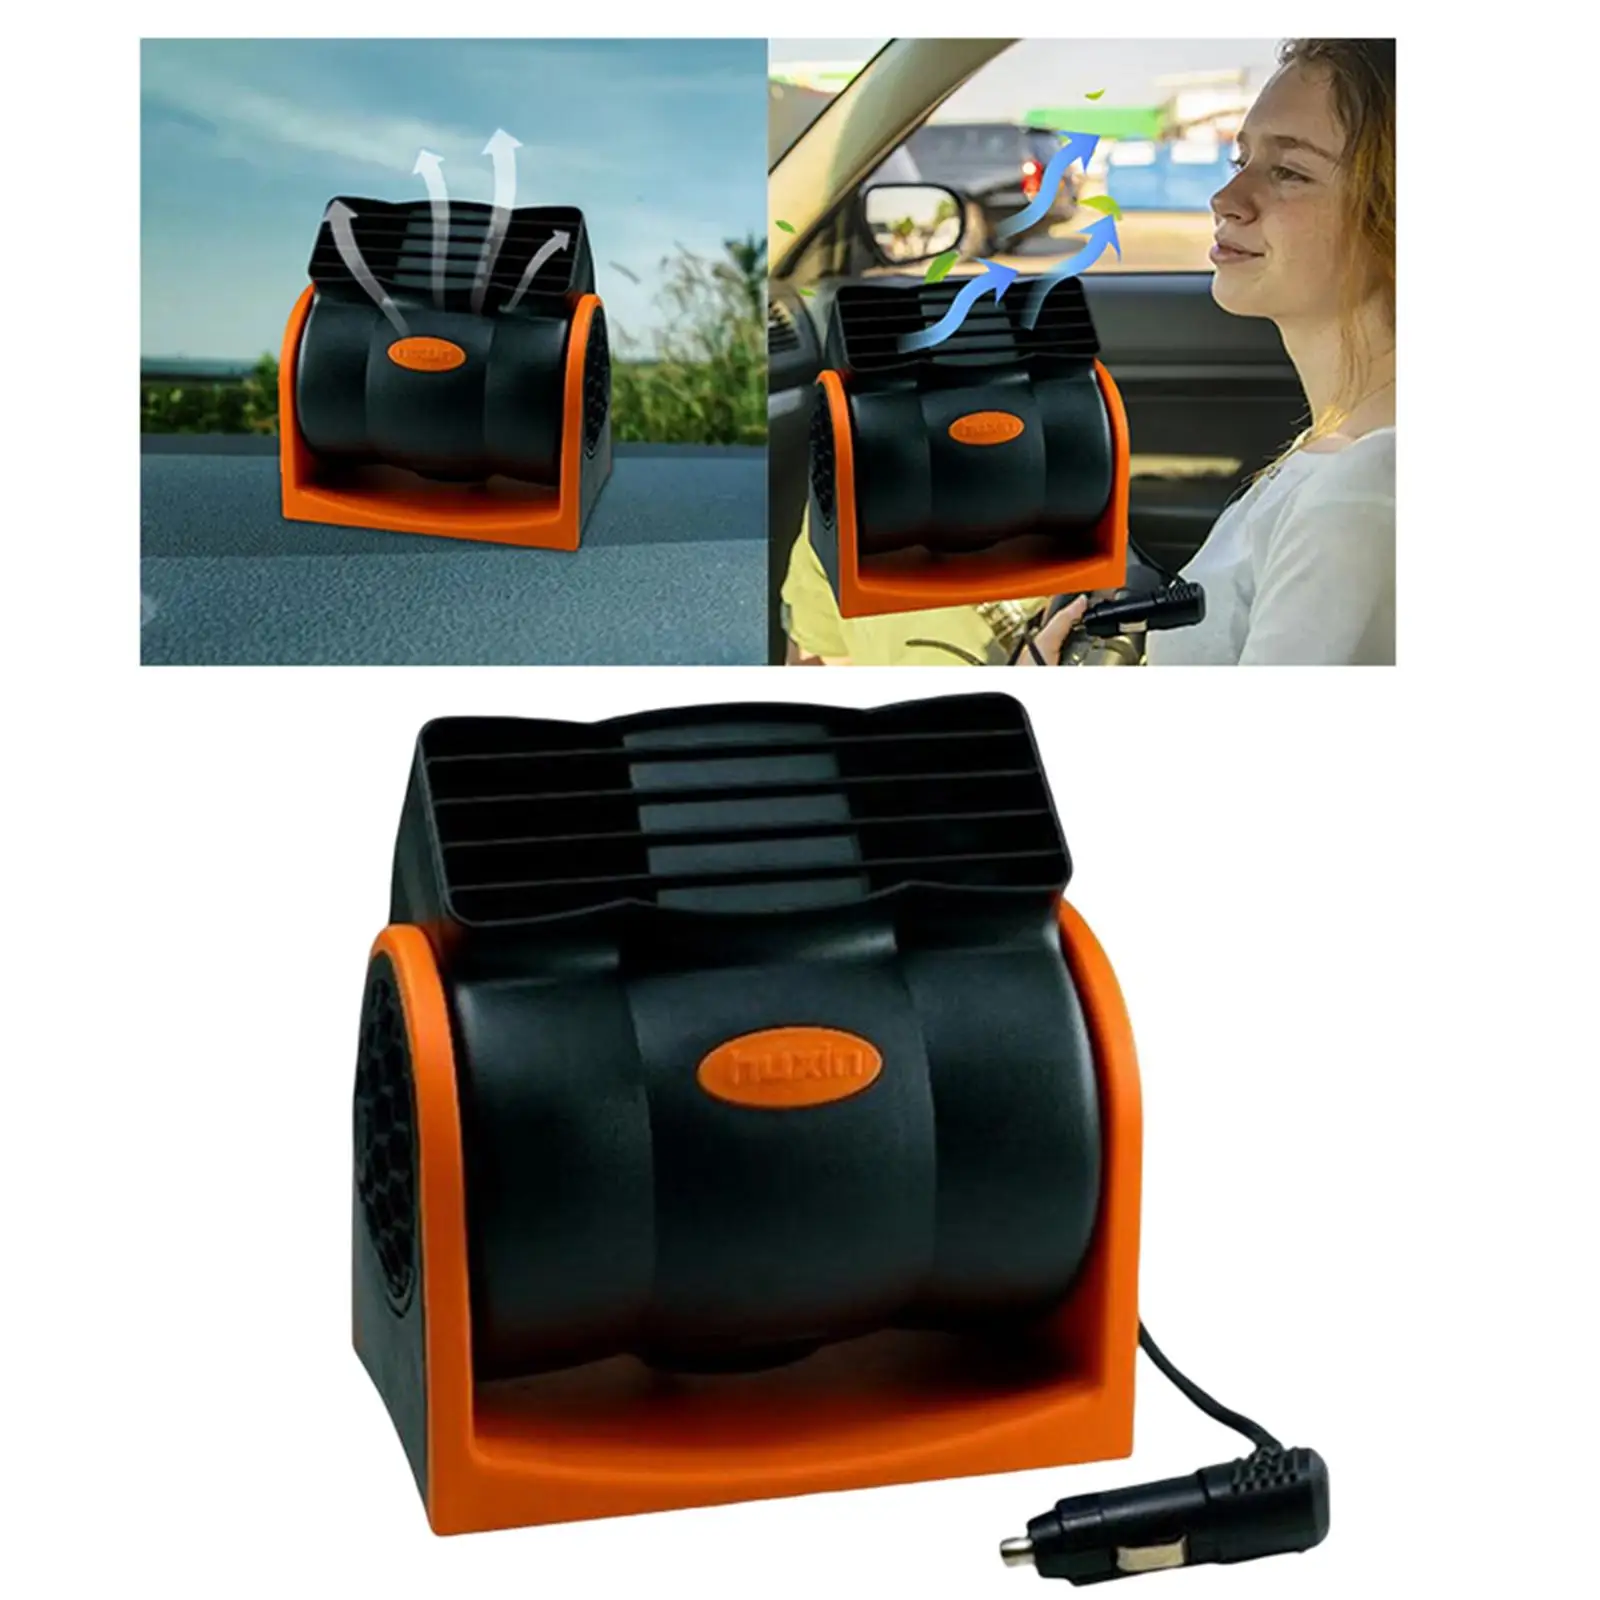 DC 24V Truck Dashboard Electric Fan Easy to Carry 2 Speeds Plug and Play